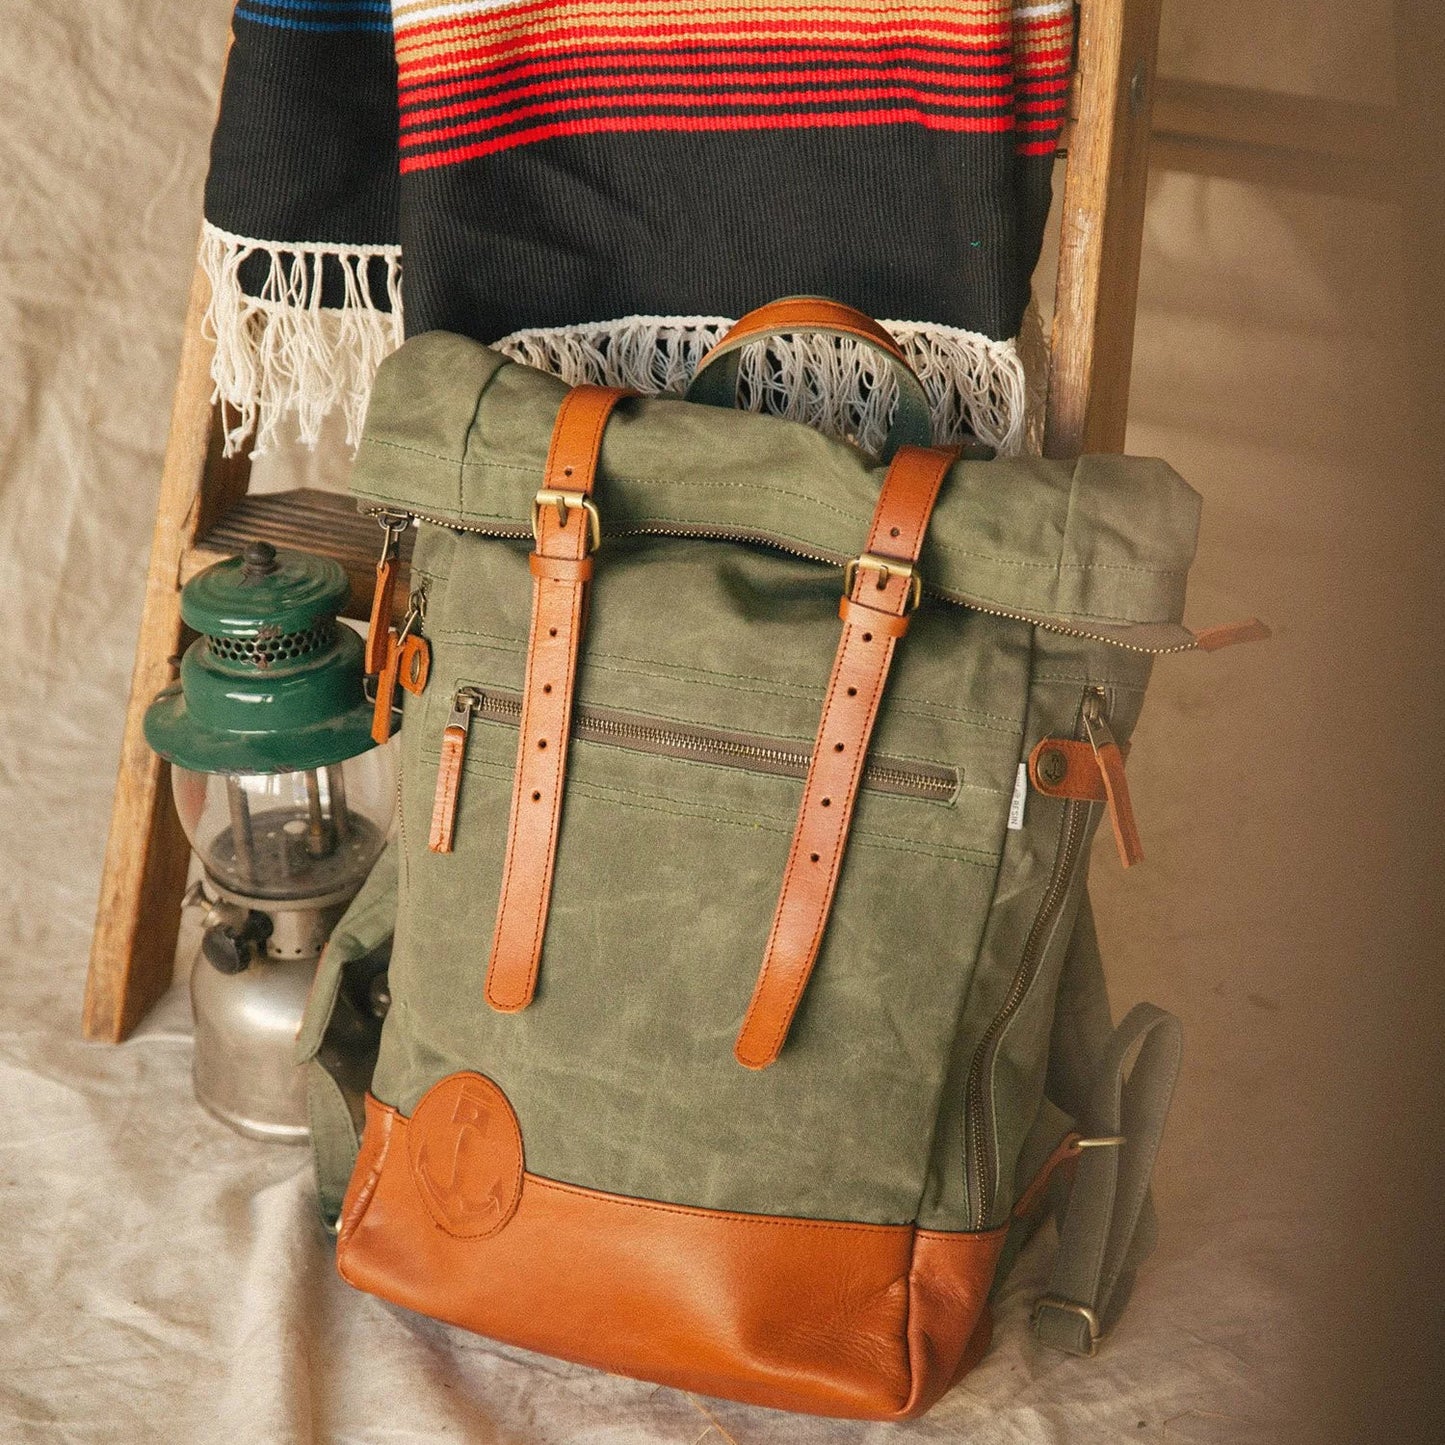 Mountain Bag Waxed Canvas - Olive